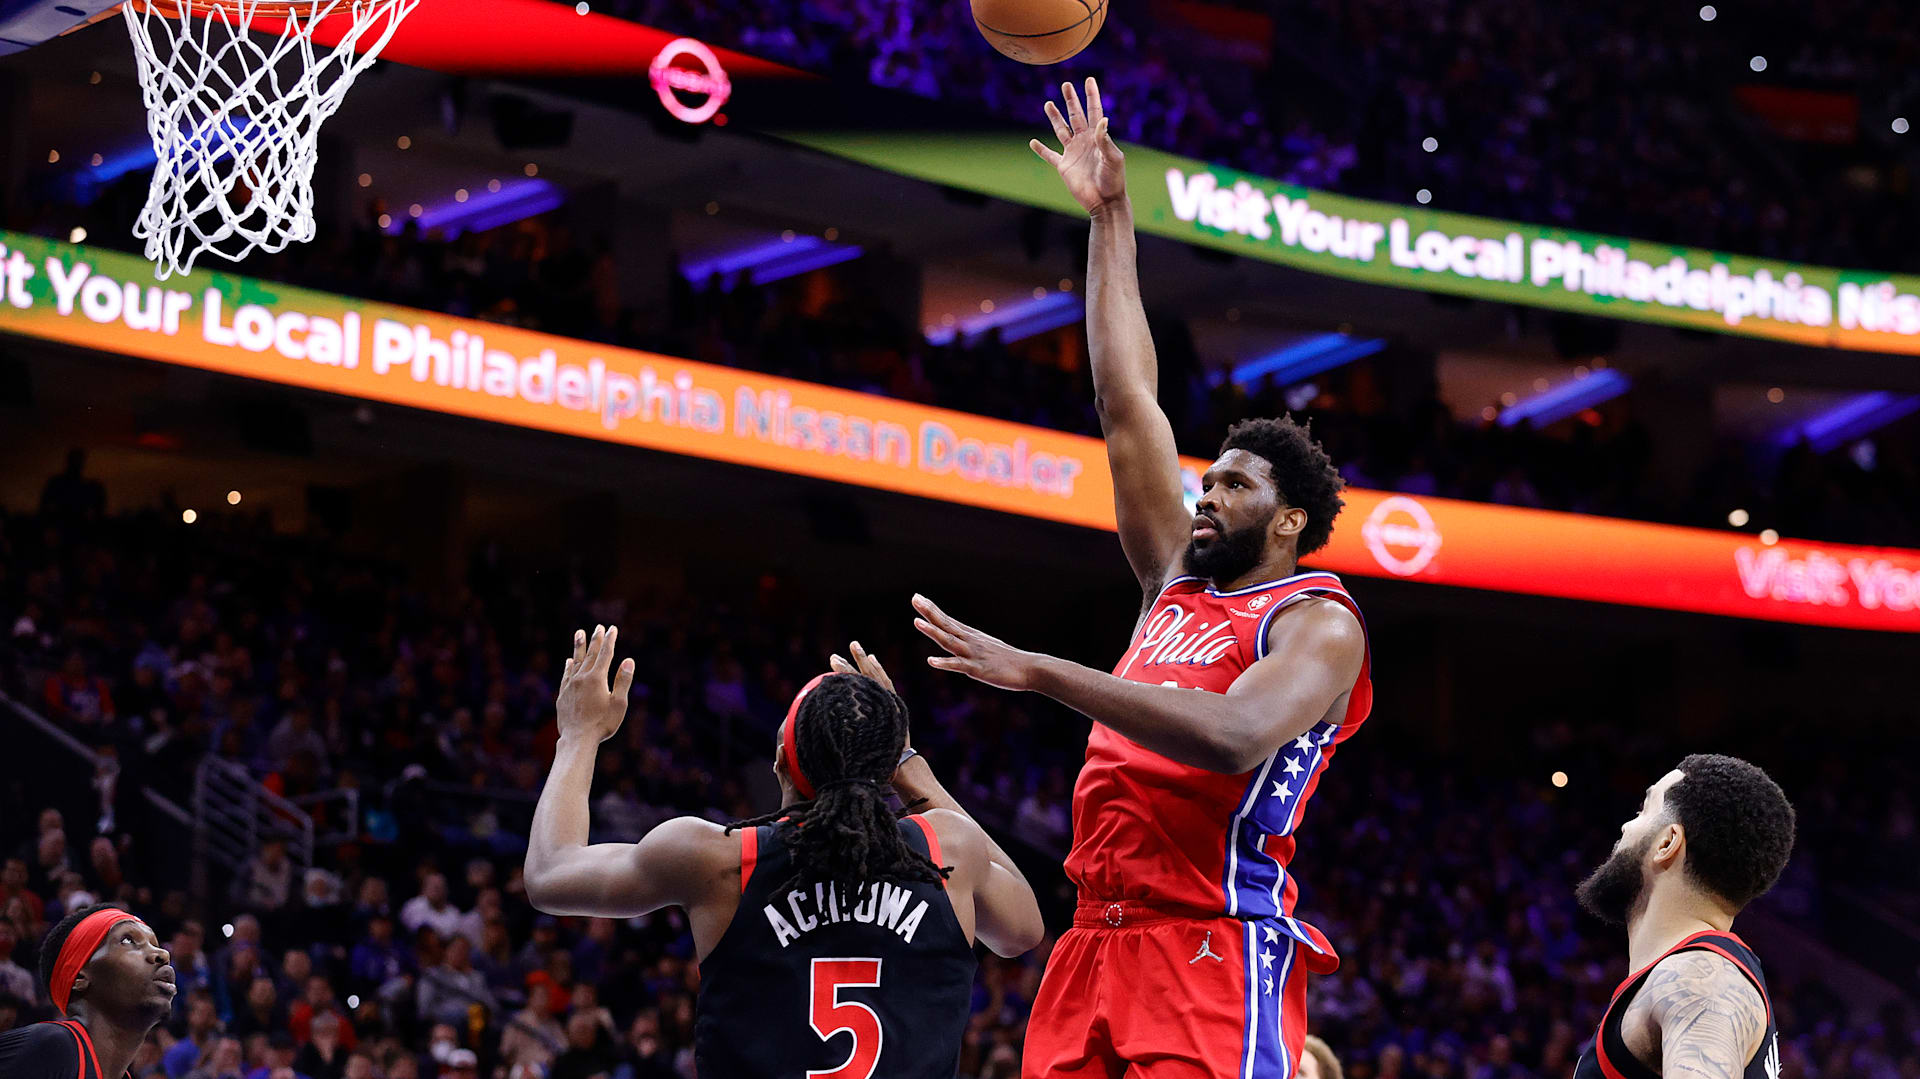 NBA star Embiid's Paris 2024 loyalties still unclear as he takes US  citizenship